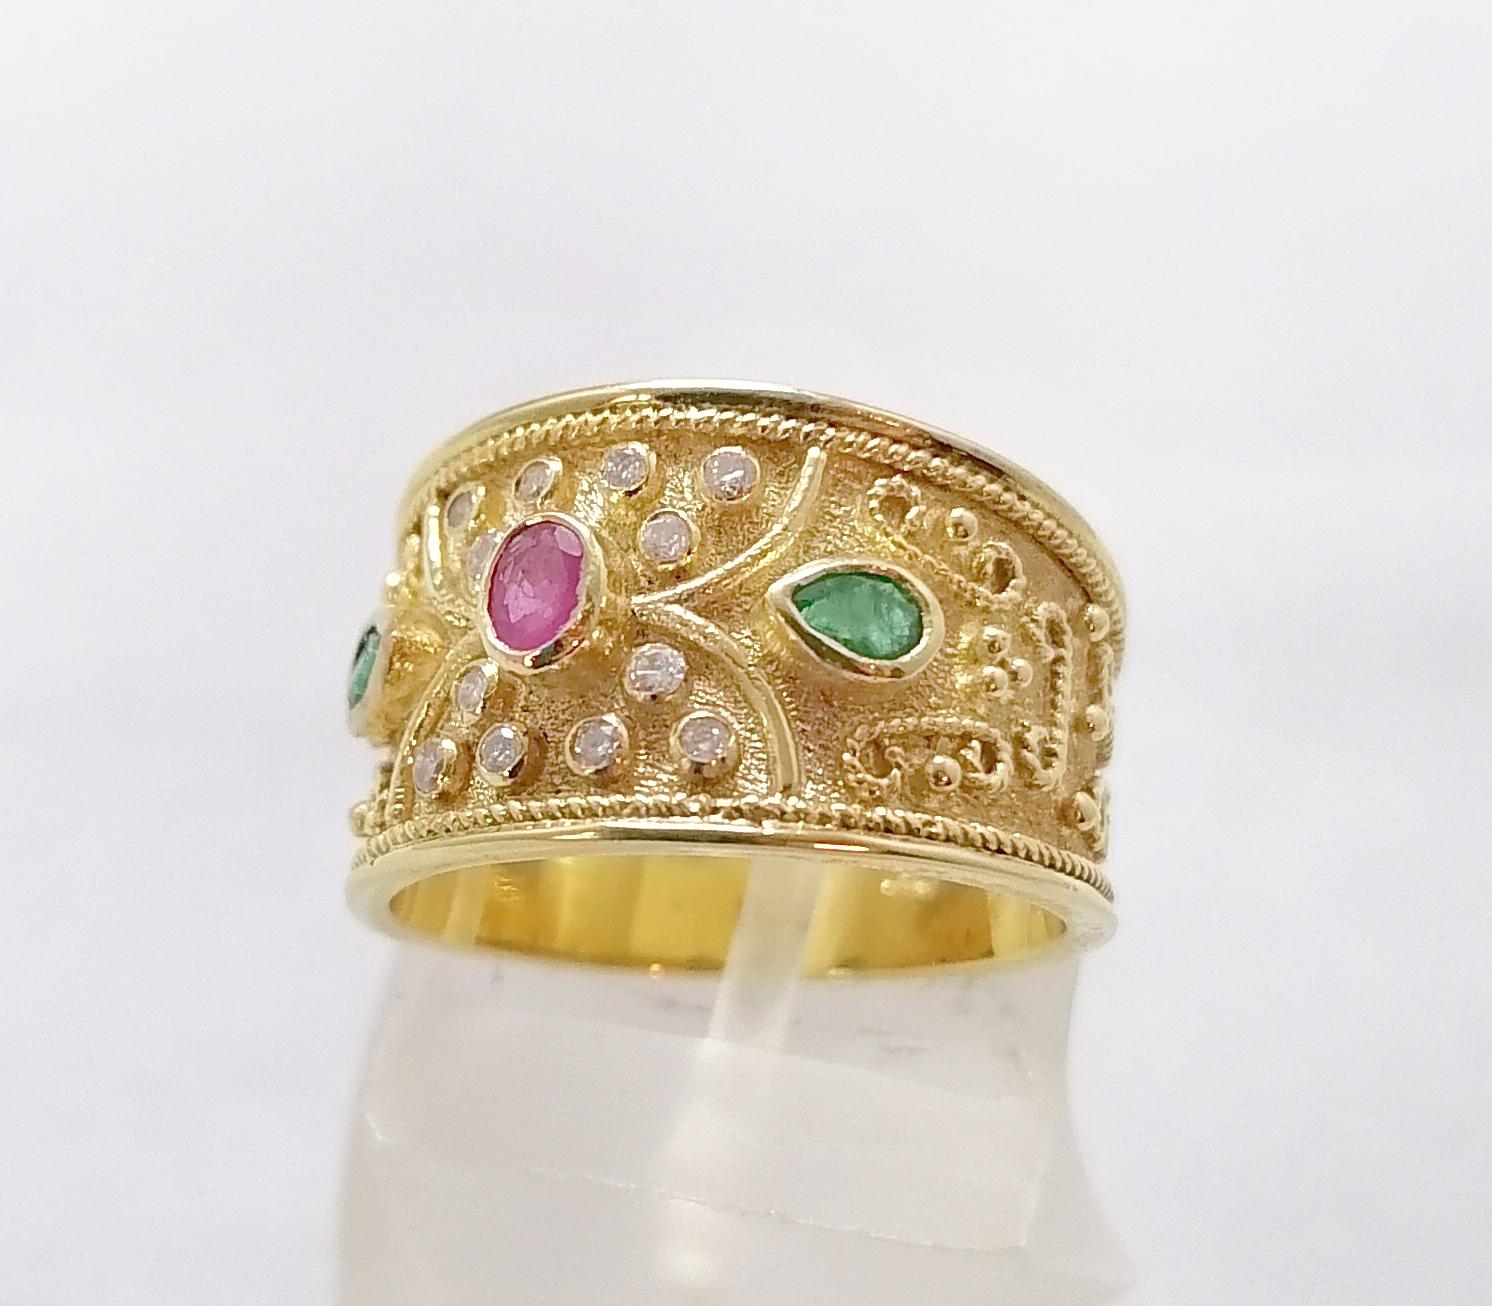 This S.Georgios designer 18 Karat Yellow Gold Multicolor wide band Ring is all handmade with Byzantine-style bead granulation and a unique velvet background. This gorgeous band ring features a center oval cut natural Ruby total weight 0.18 Carat,